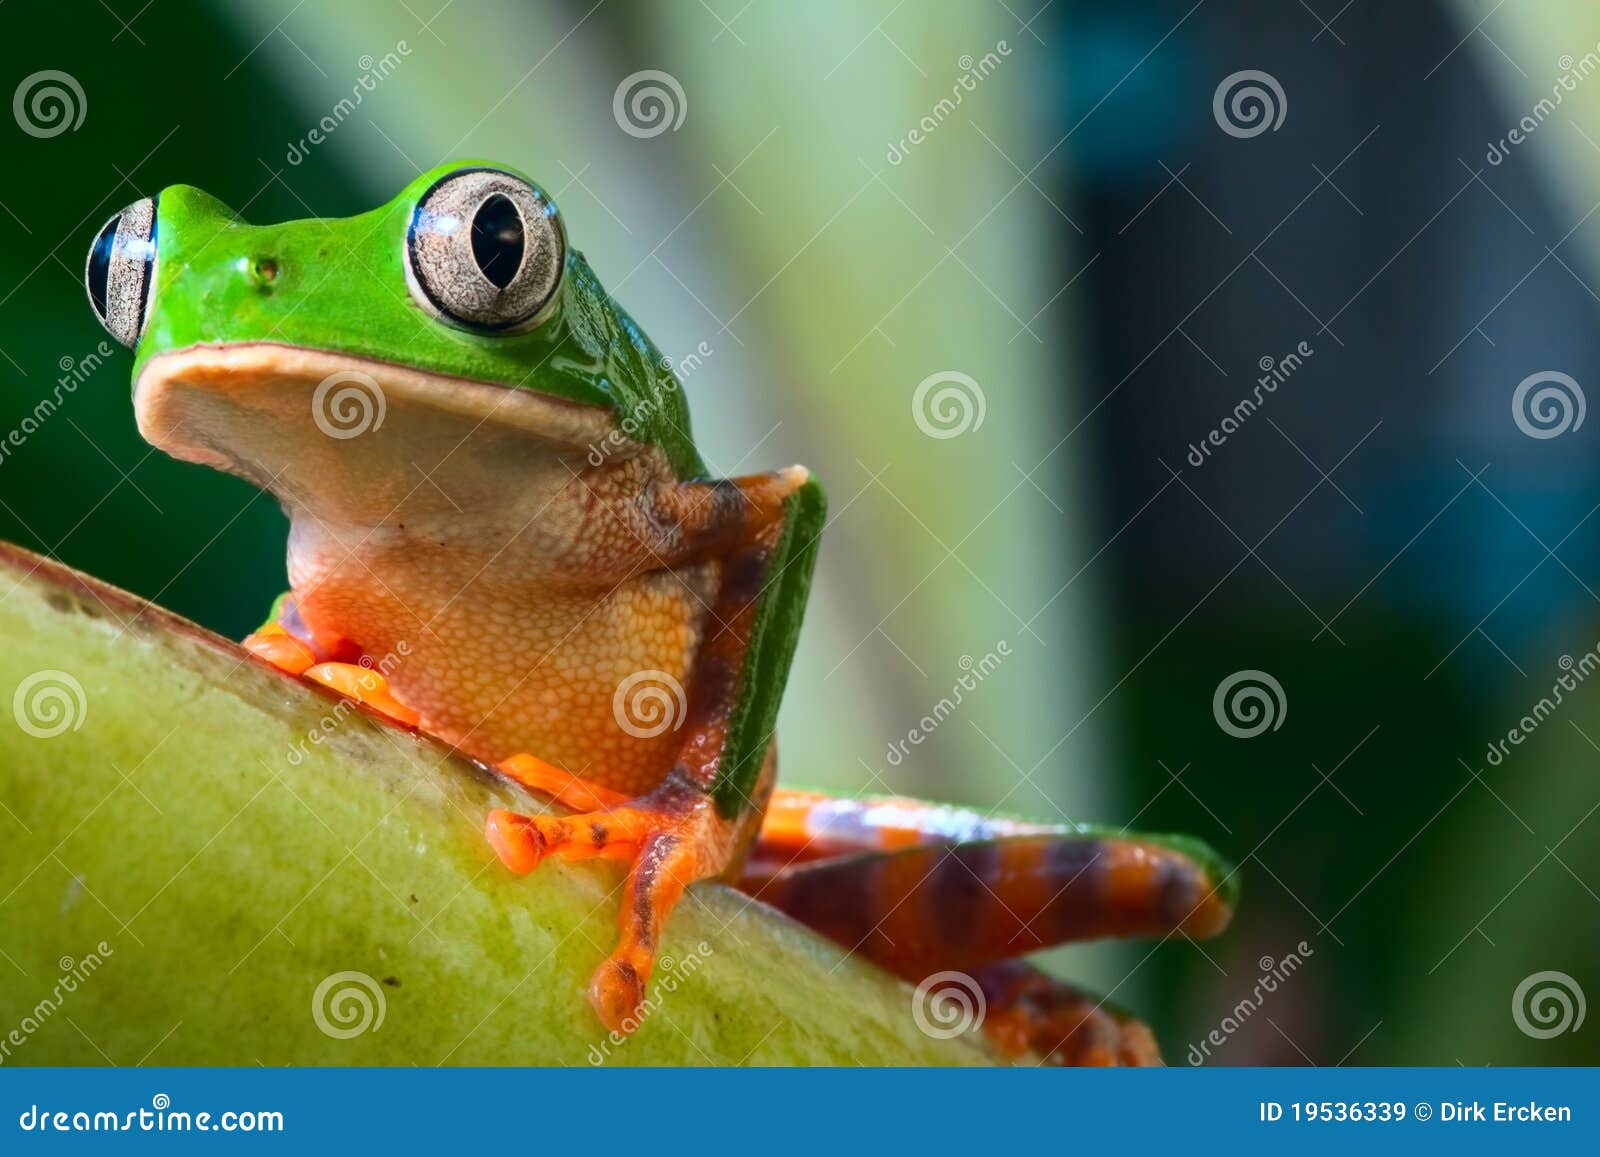 tree frog in brazil tropical amazon rain forest